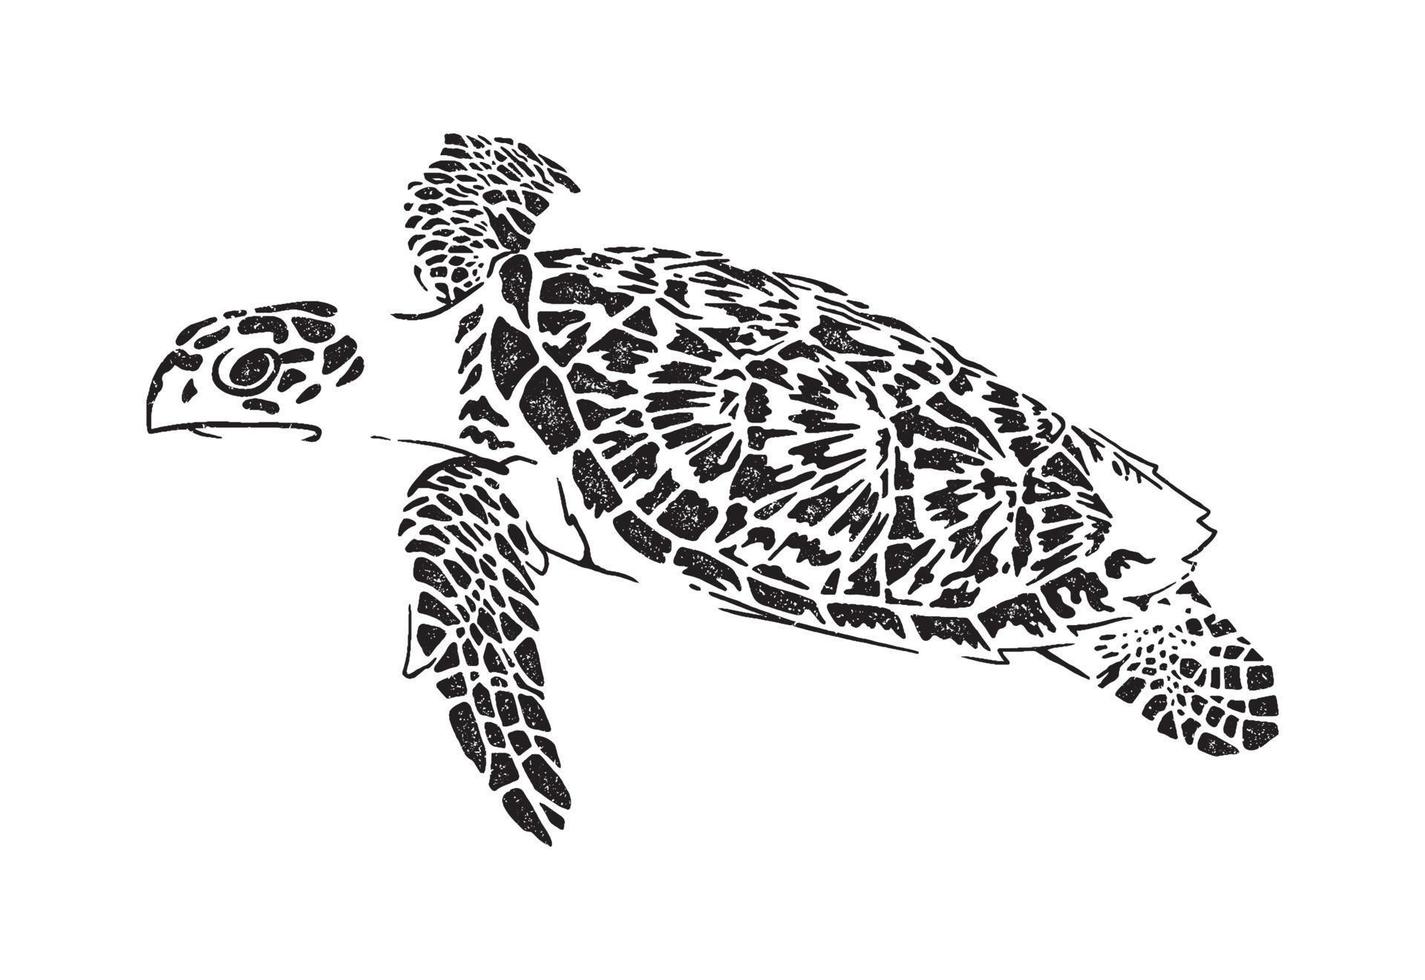 Sea turtle silhouette vector graphic illustration on white background